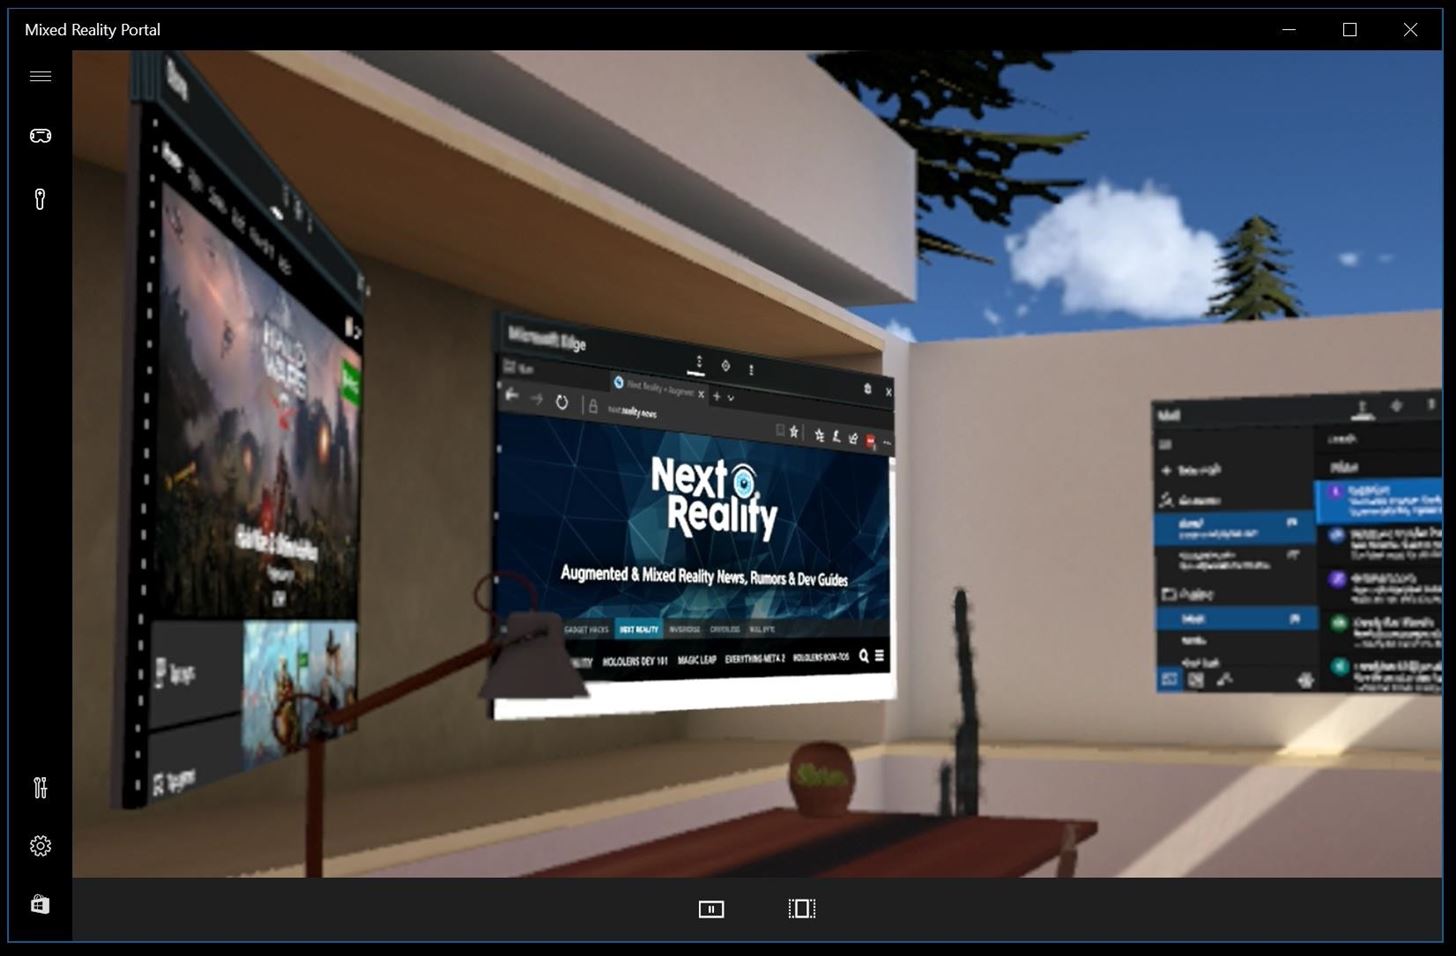 tørst Slip sko tofu Try Windows 10's Mixed Reality Portal on Your PC with Insider Build 15048 —  No Headset Required « Mixed Reality News :: Next Reality